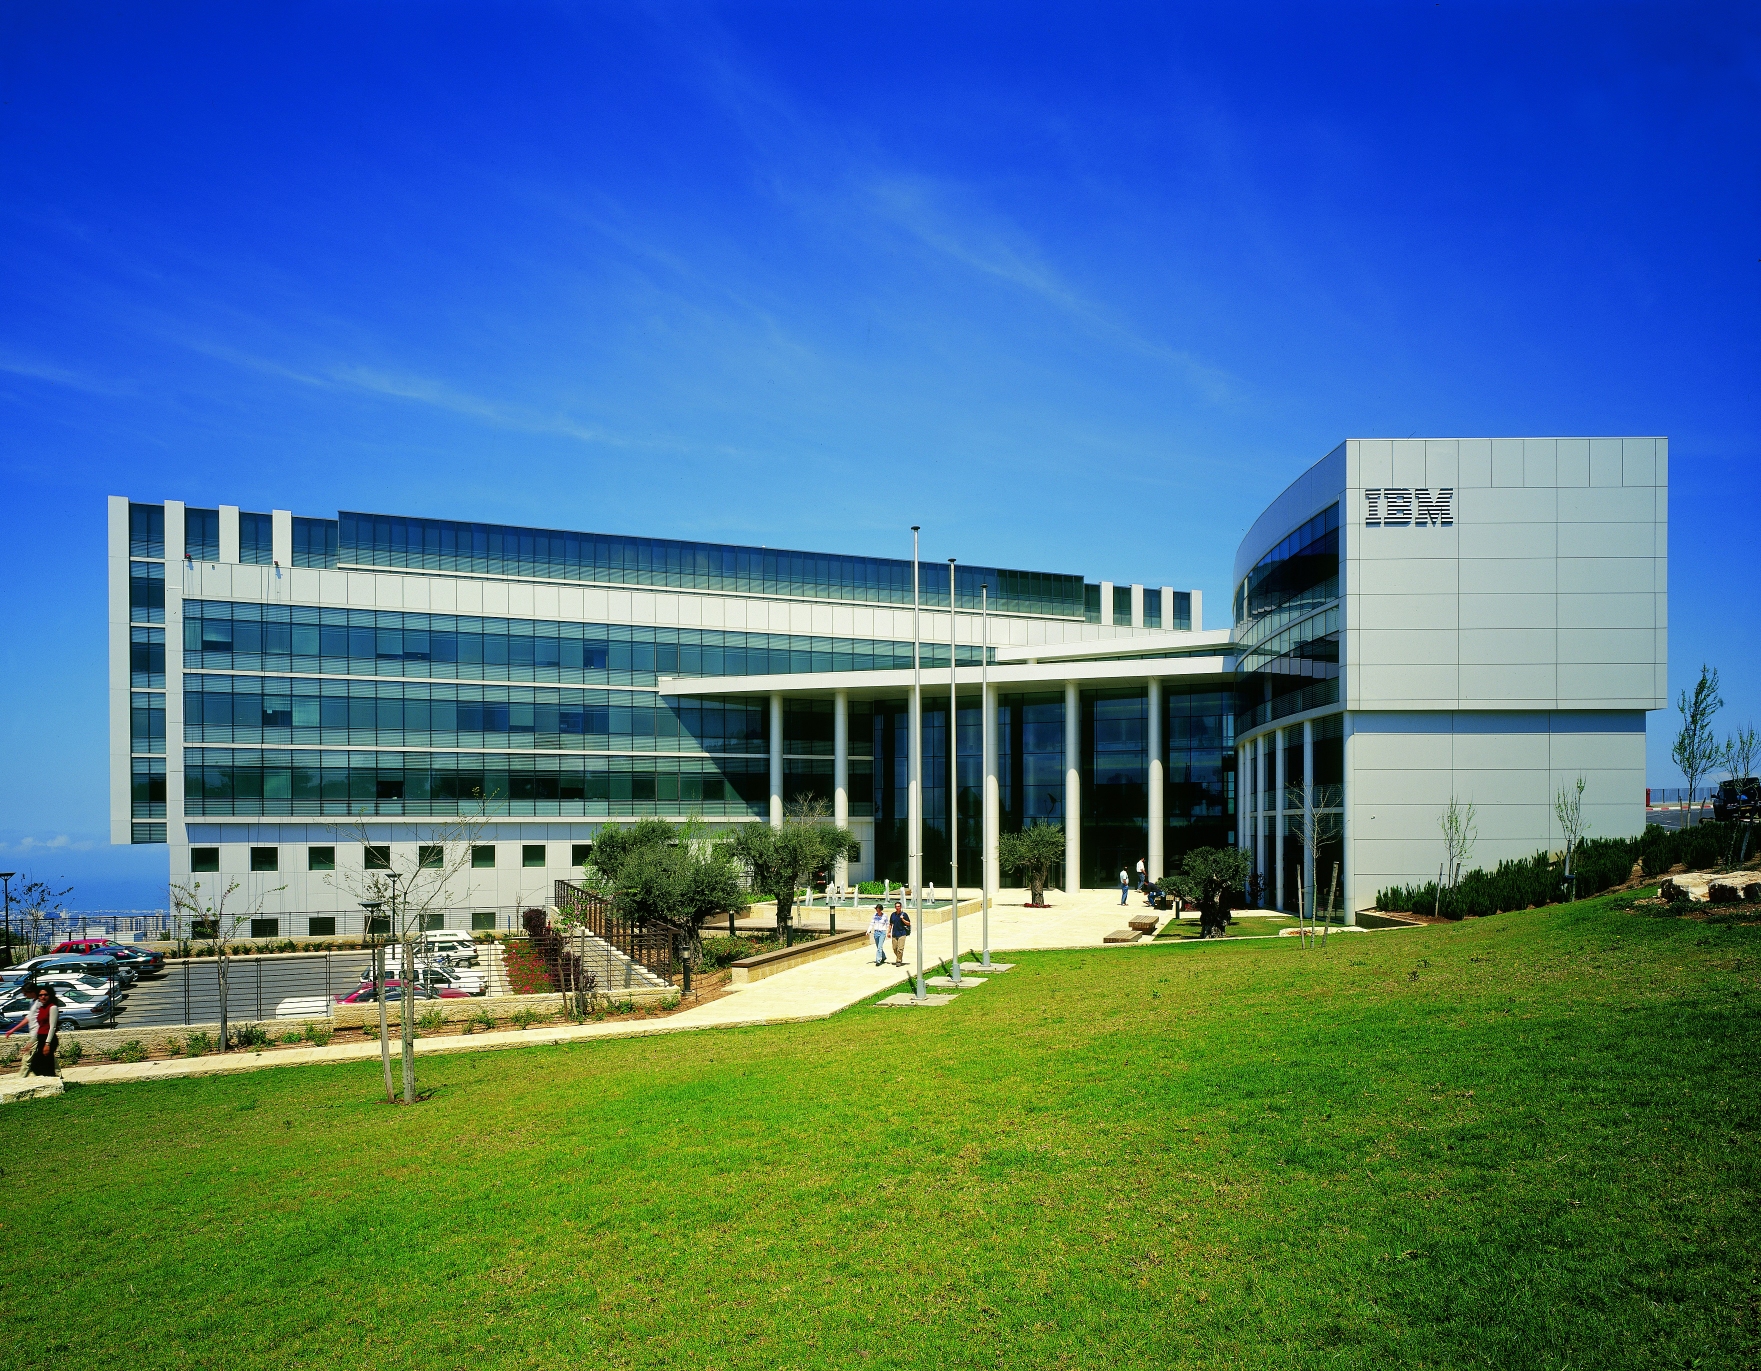 IBM Israel research offices in Haifa. Photo courtesy